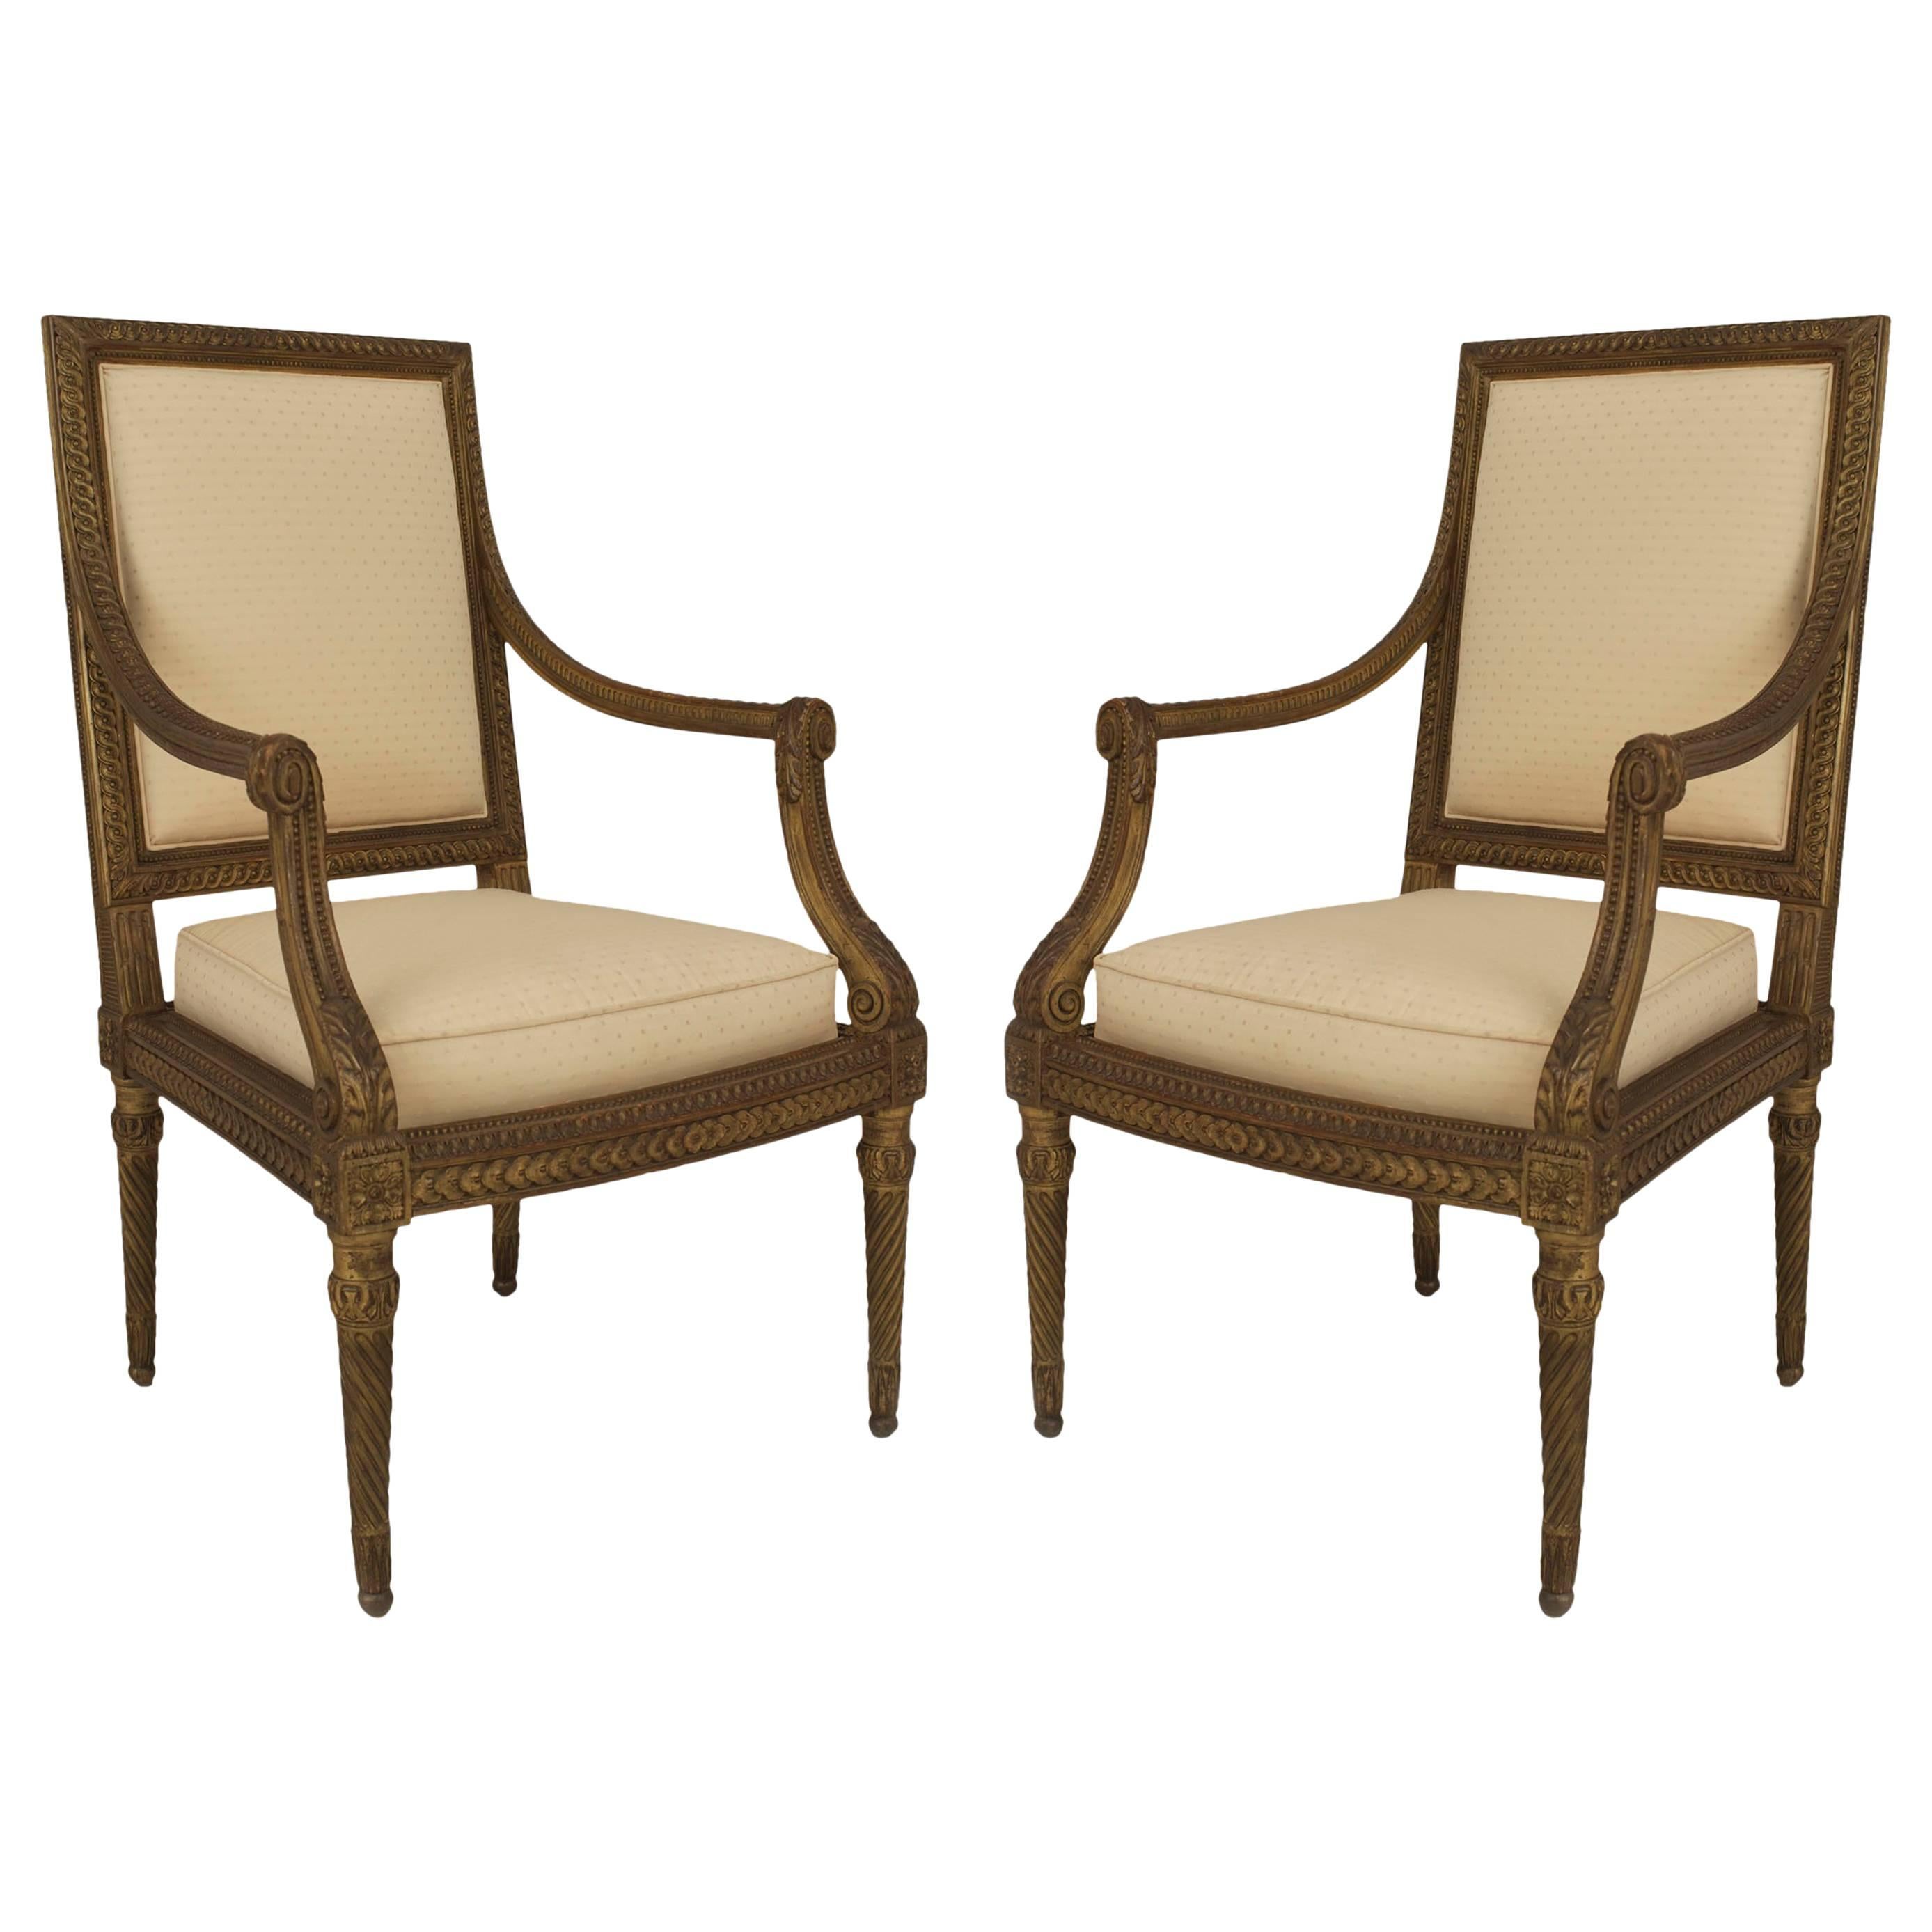 Pair of French Louis XVI Style ‘19th Century’ Gilt Open Armchairs